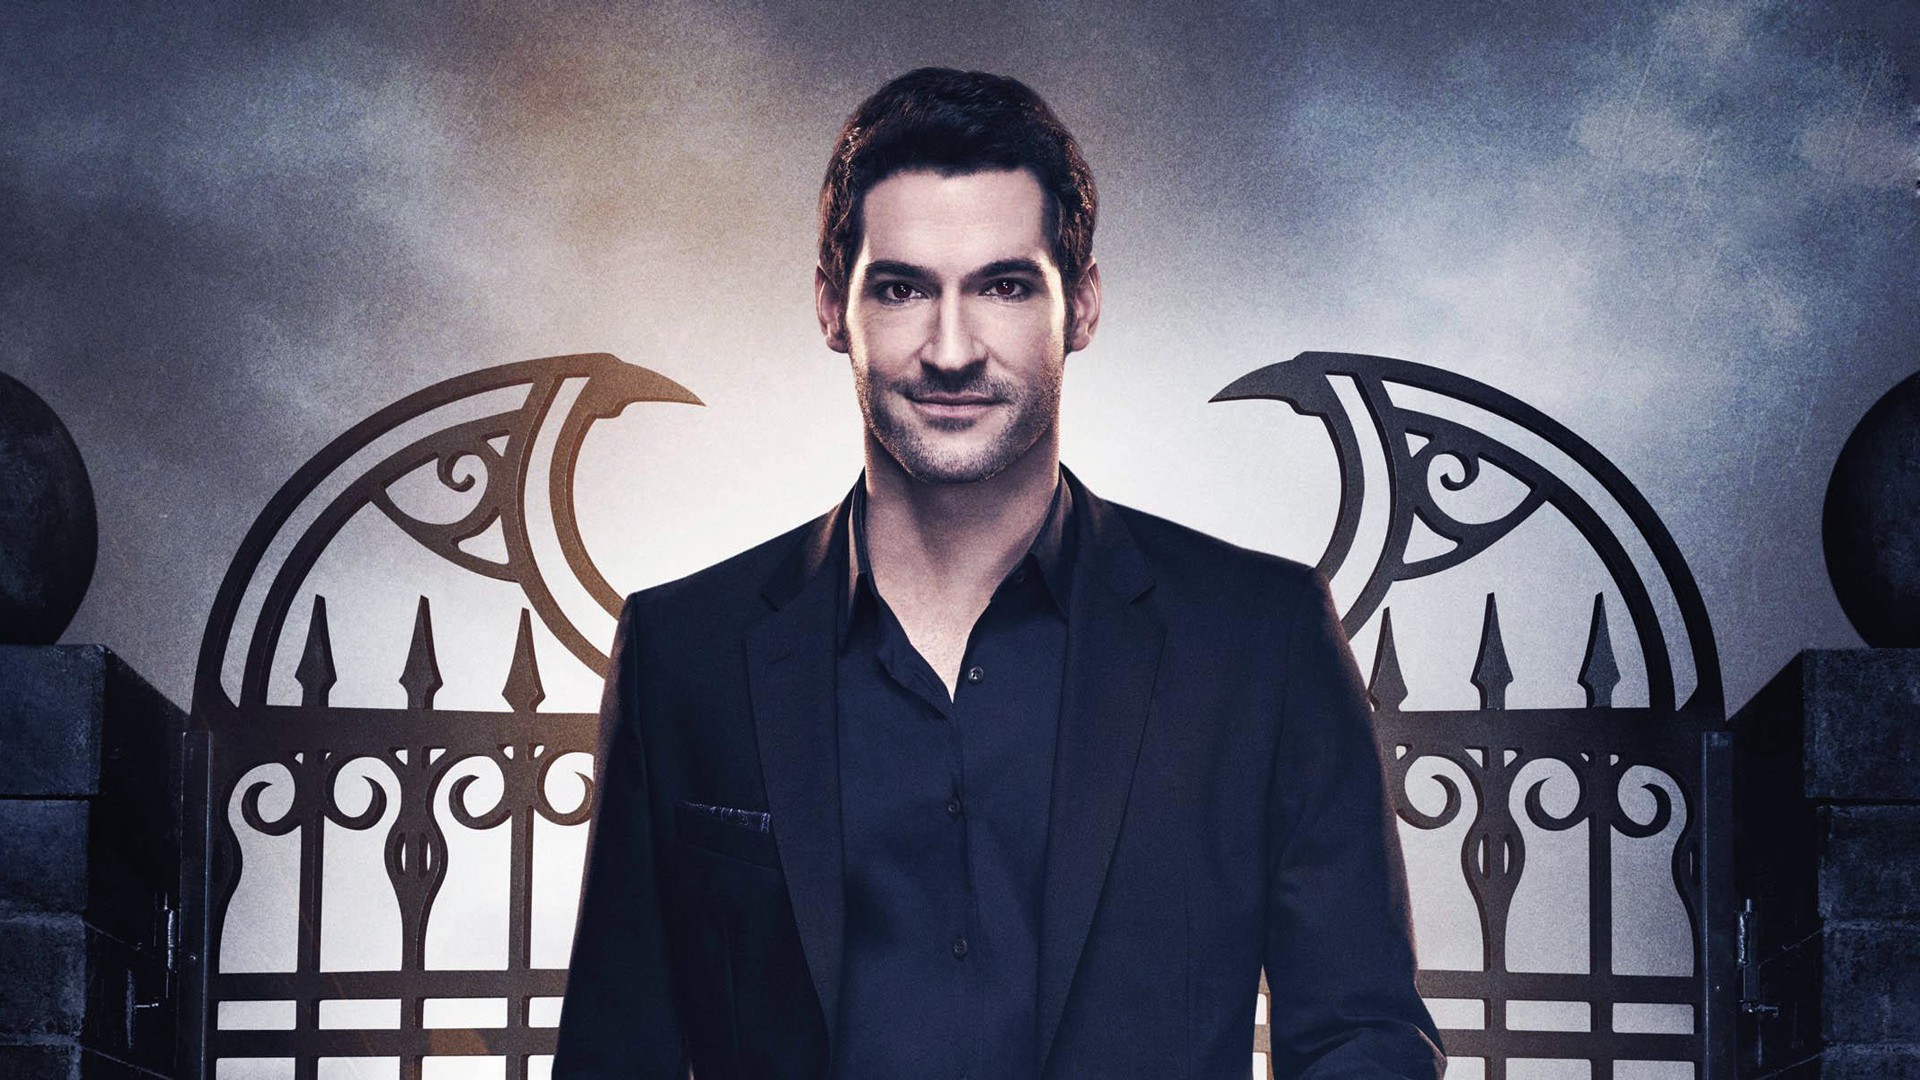 Lucifer Season 5 Episodes can Release Earlier on Netflix due to the Coronavirus Pandemic